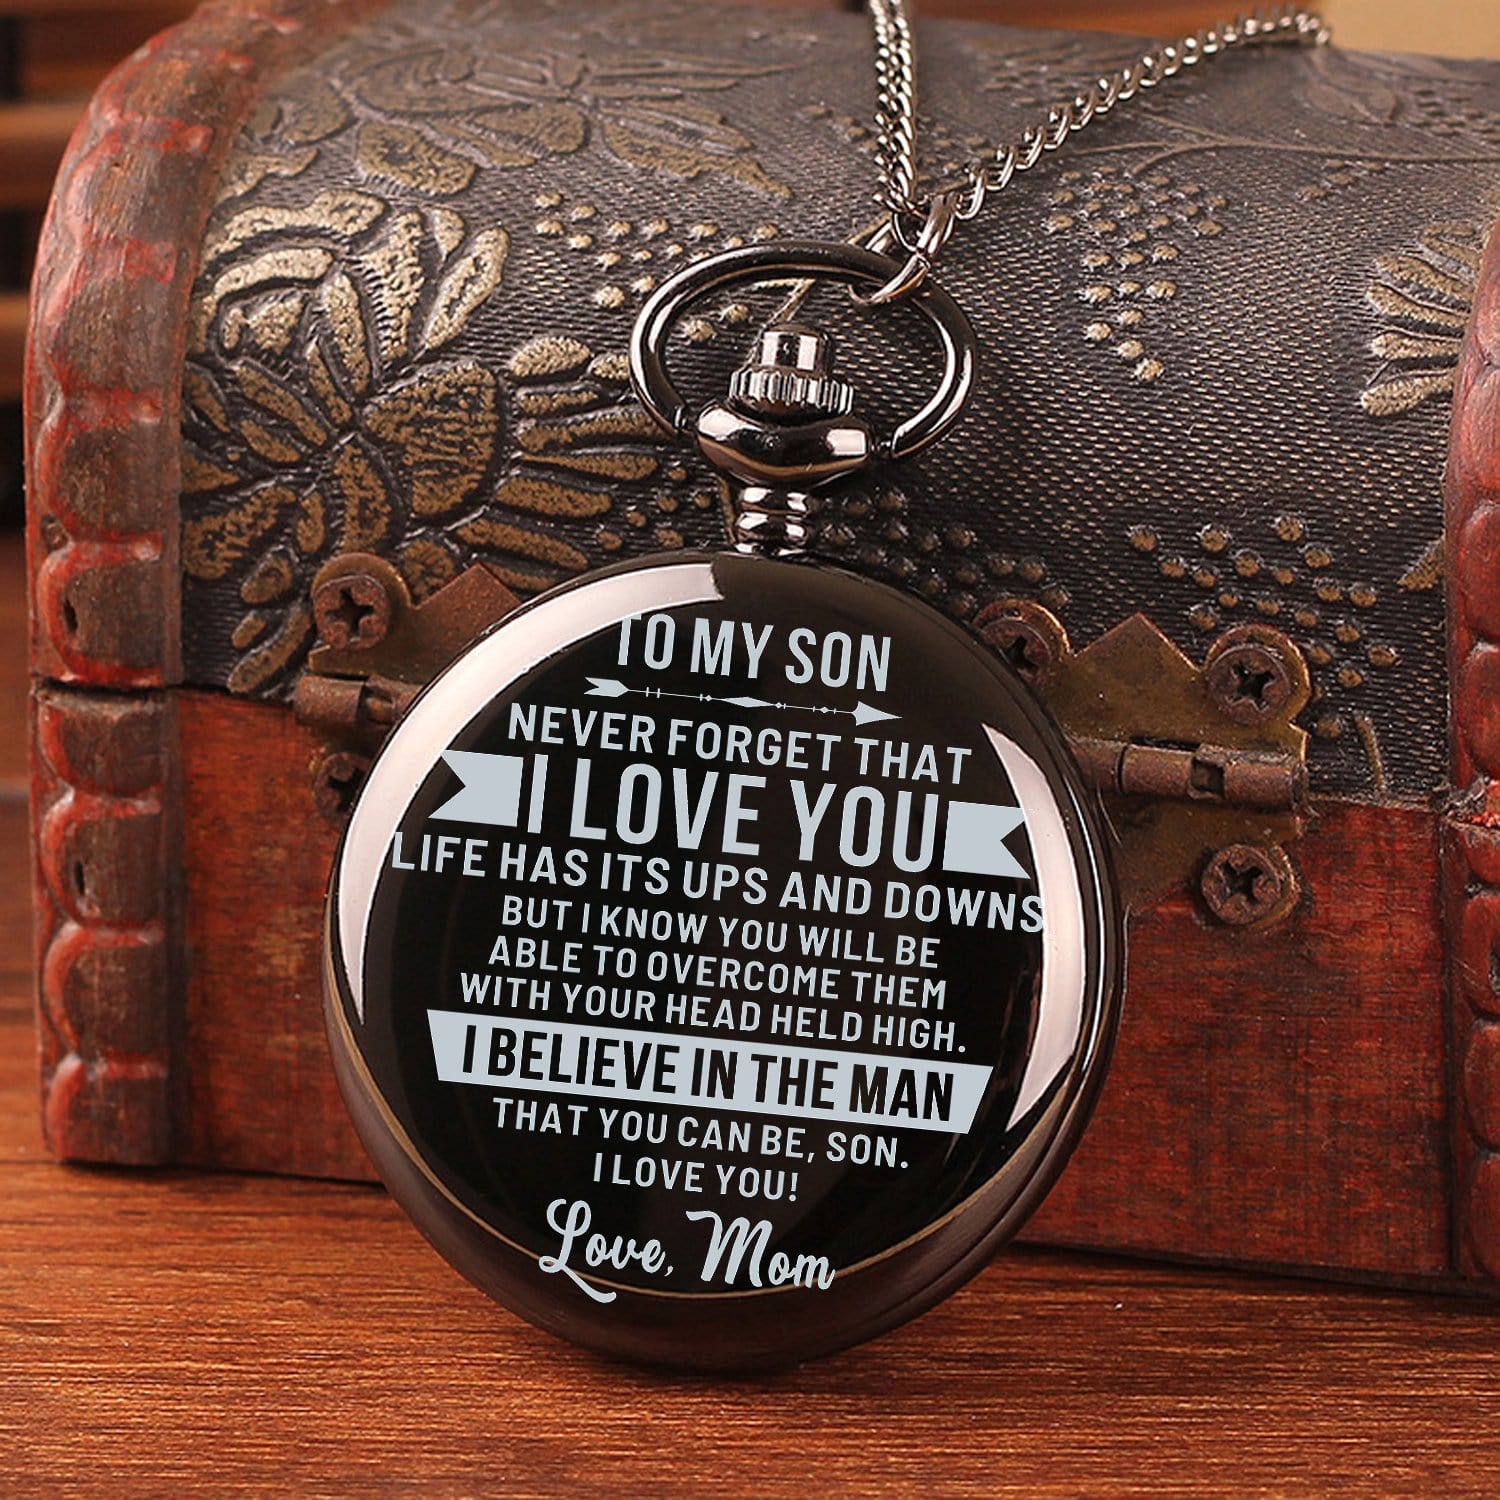 Pocket Watches Mom To Son - I Believe In The Man Pocket Watch GiveMe-Gifts